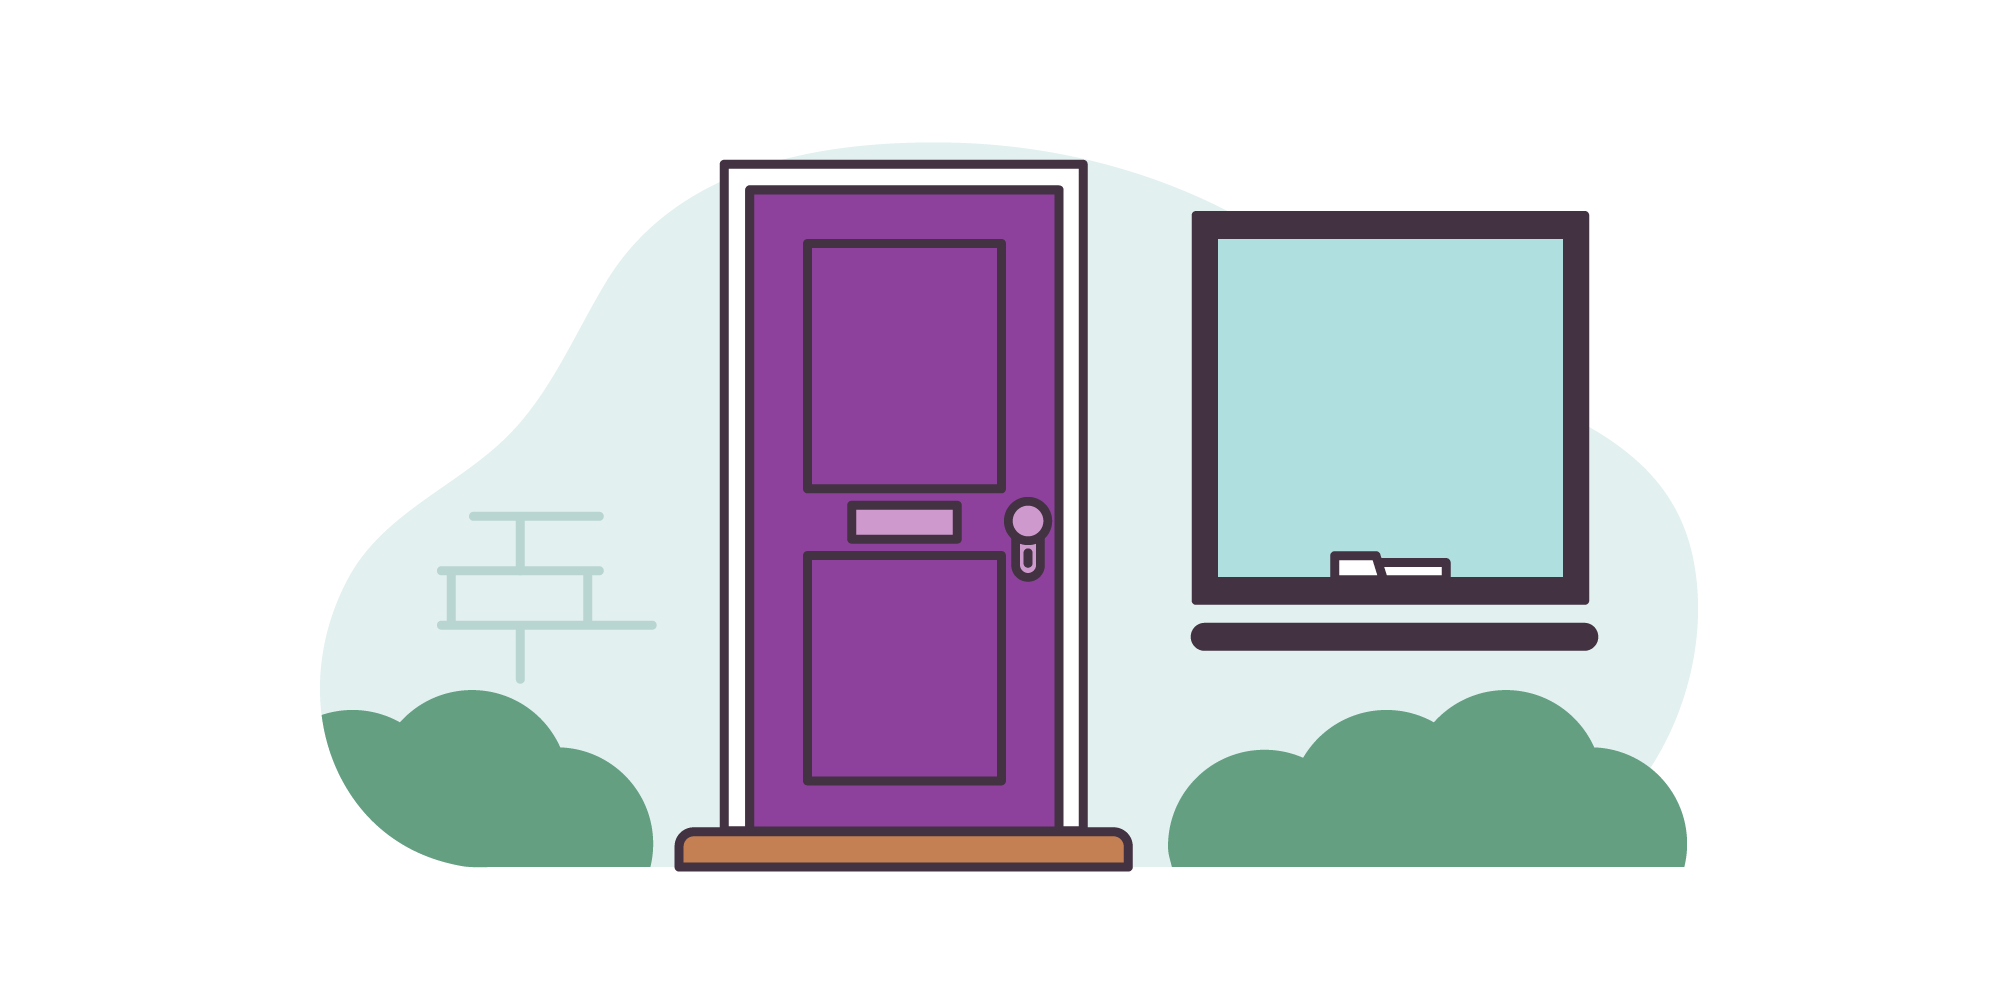 Illustration of a front door and locked window